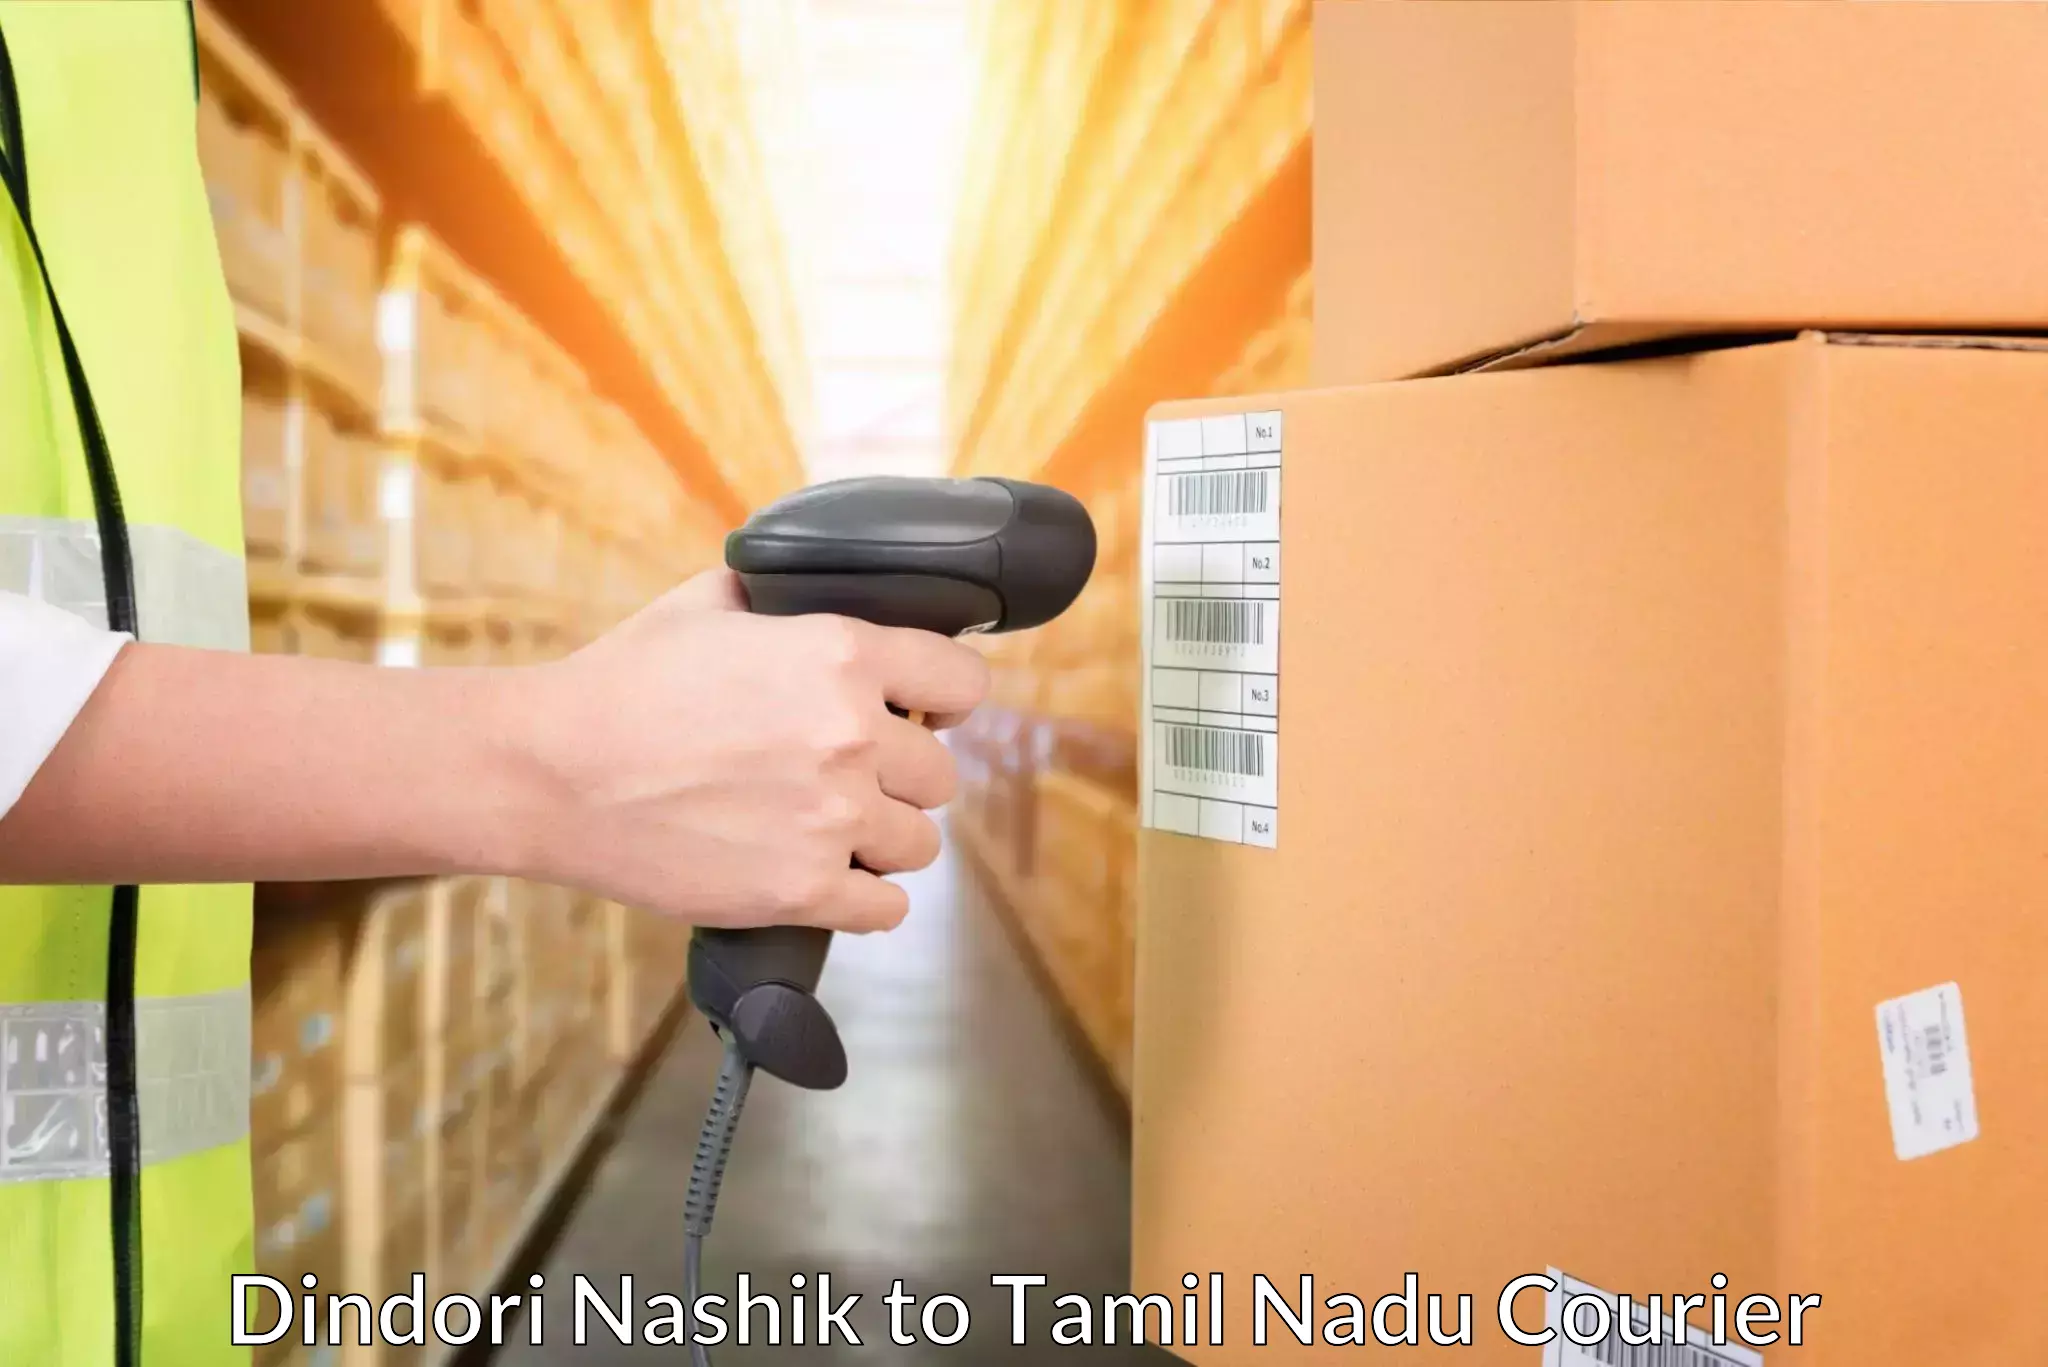 Efficient freight service Dindori Nashik to Meenakshi Academy of Higher Education and Research Chennai